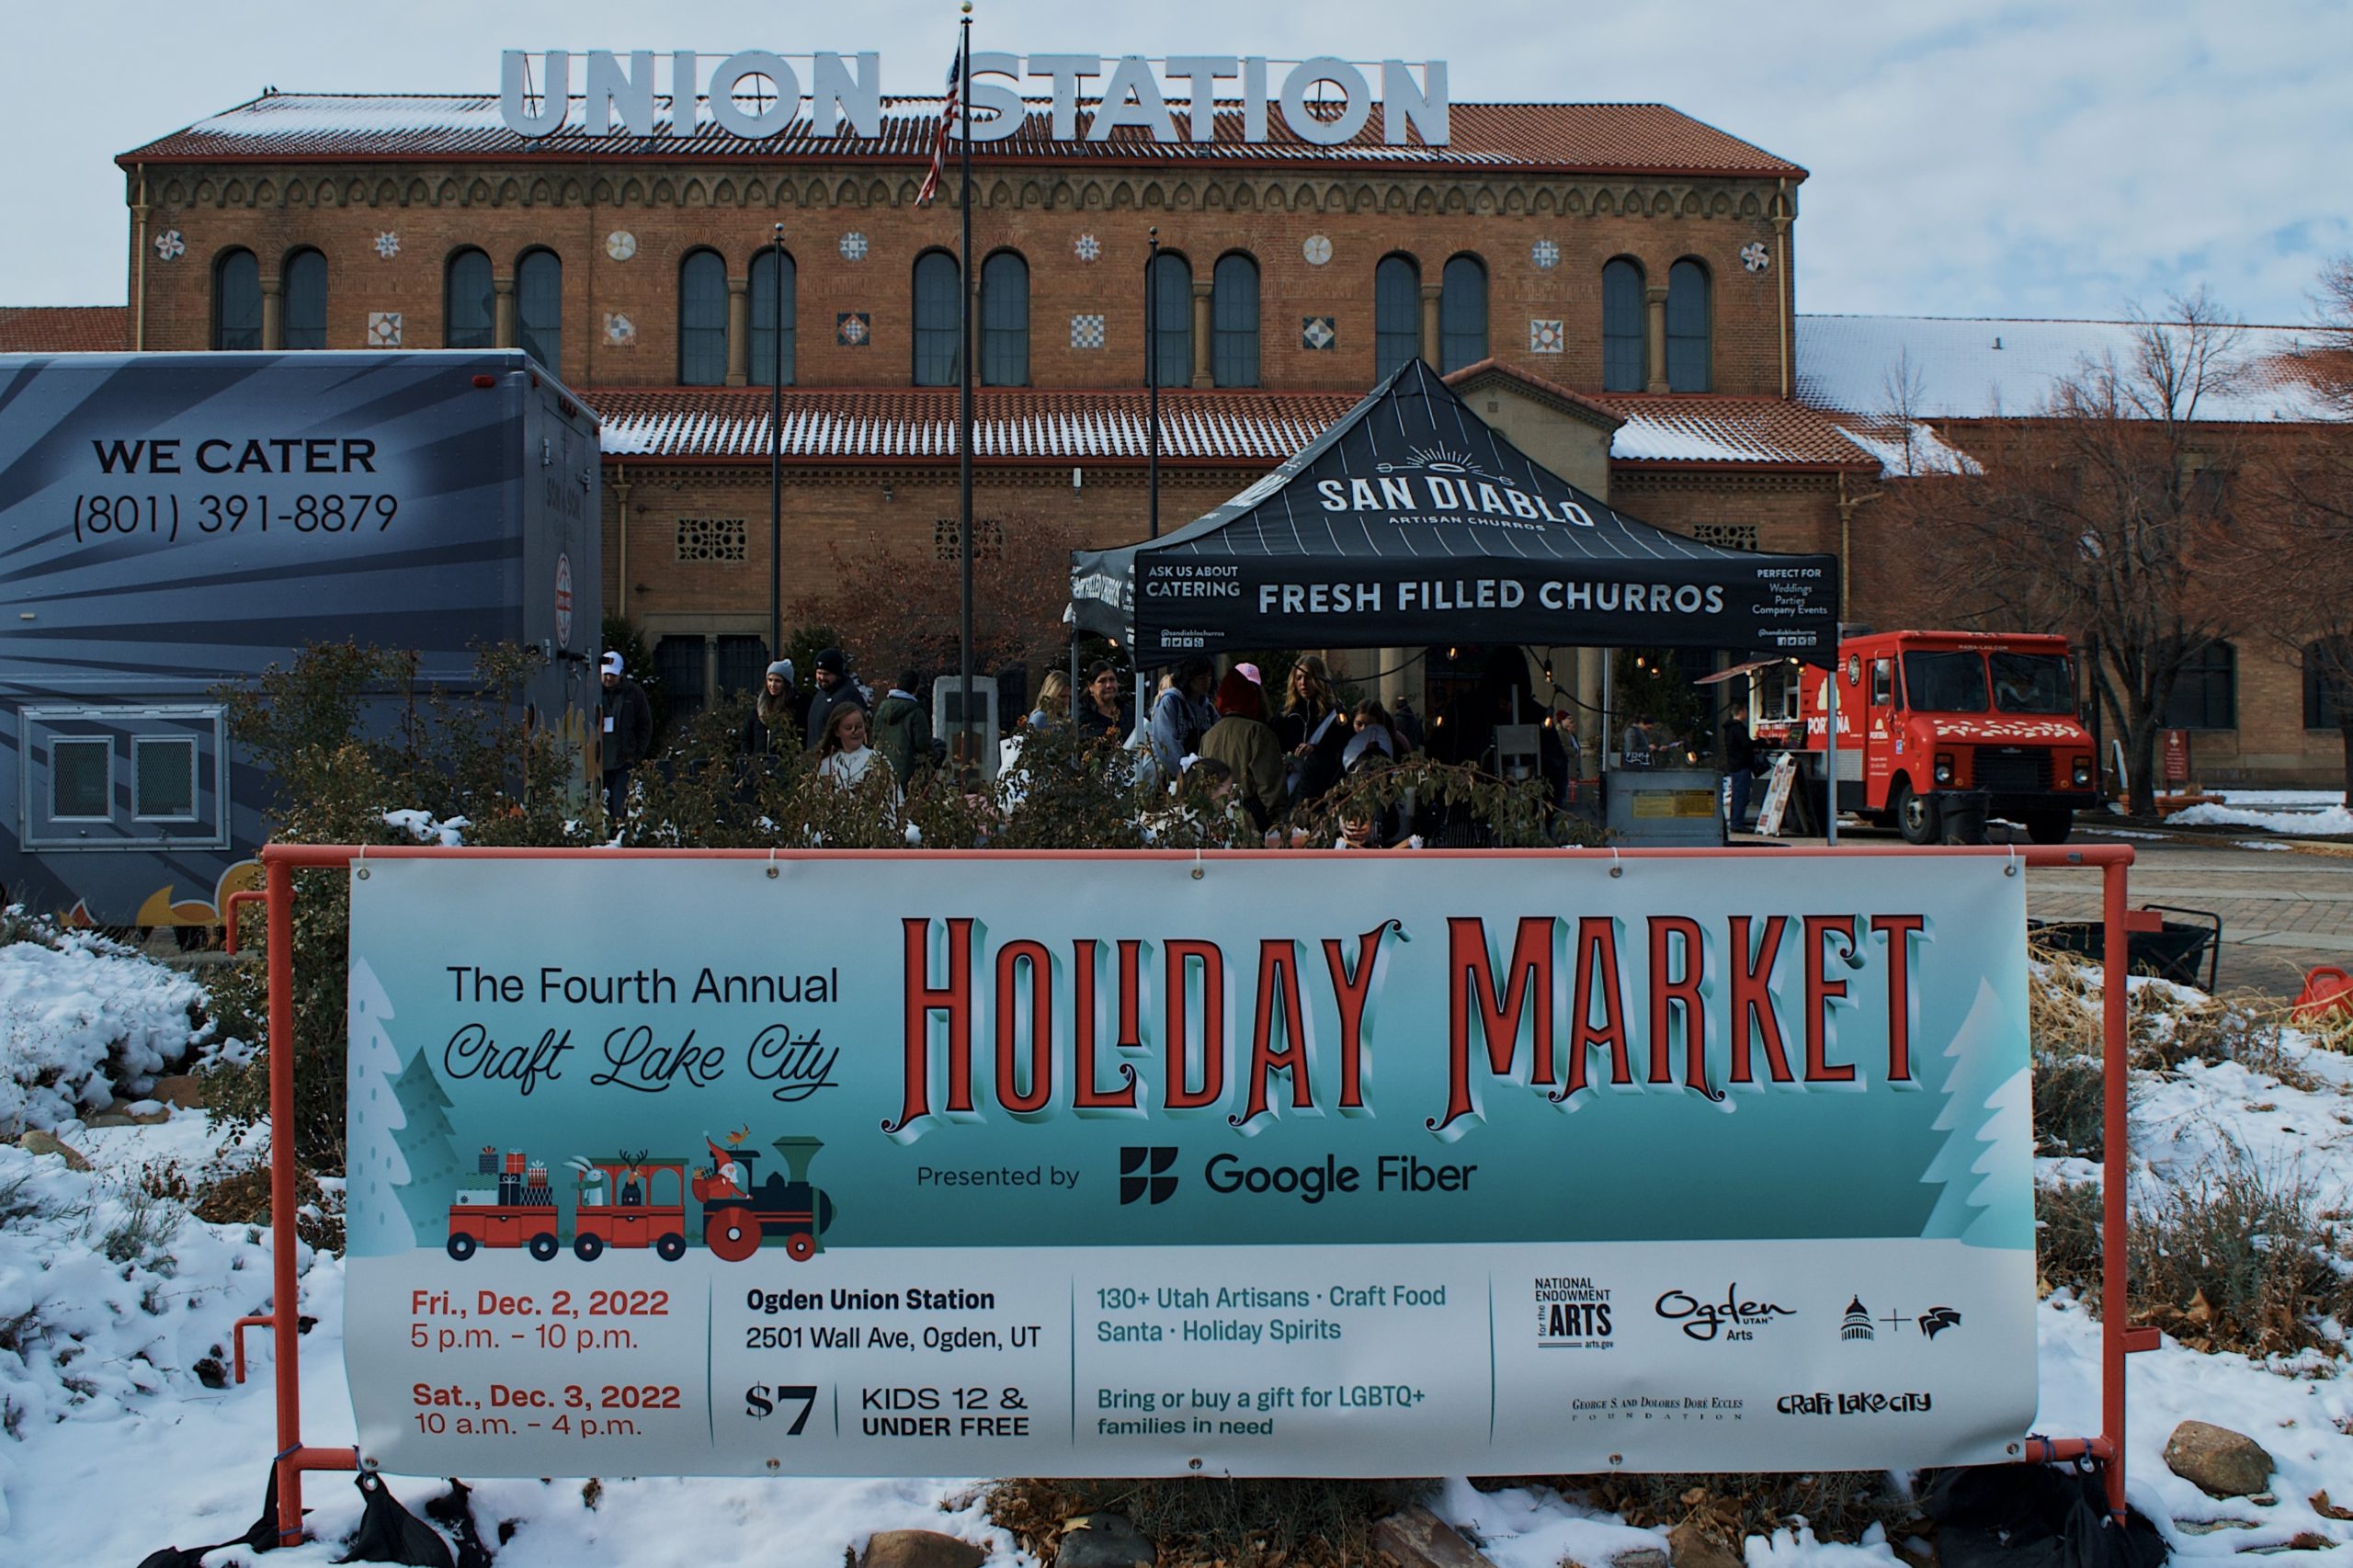 Craft Lake City’s Holiday Market was finally here and you could feel the holiday spirit in the crisp winter air (Photo: Lexi Kiedaisch).